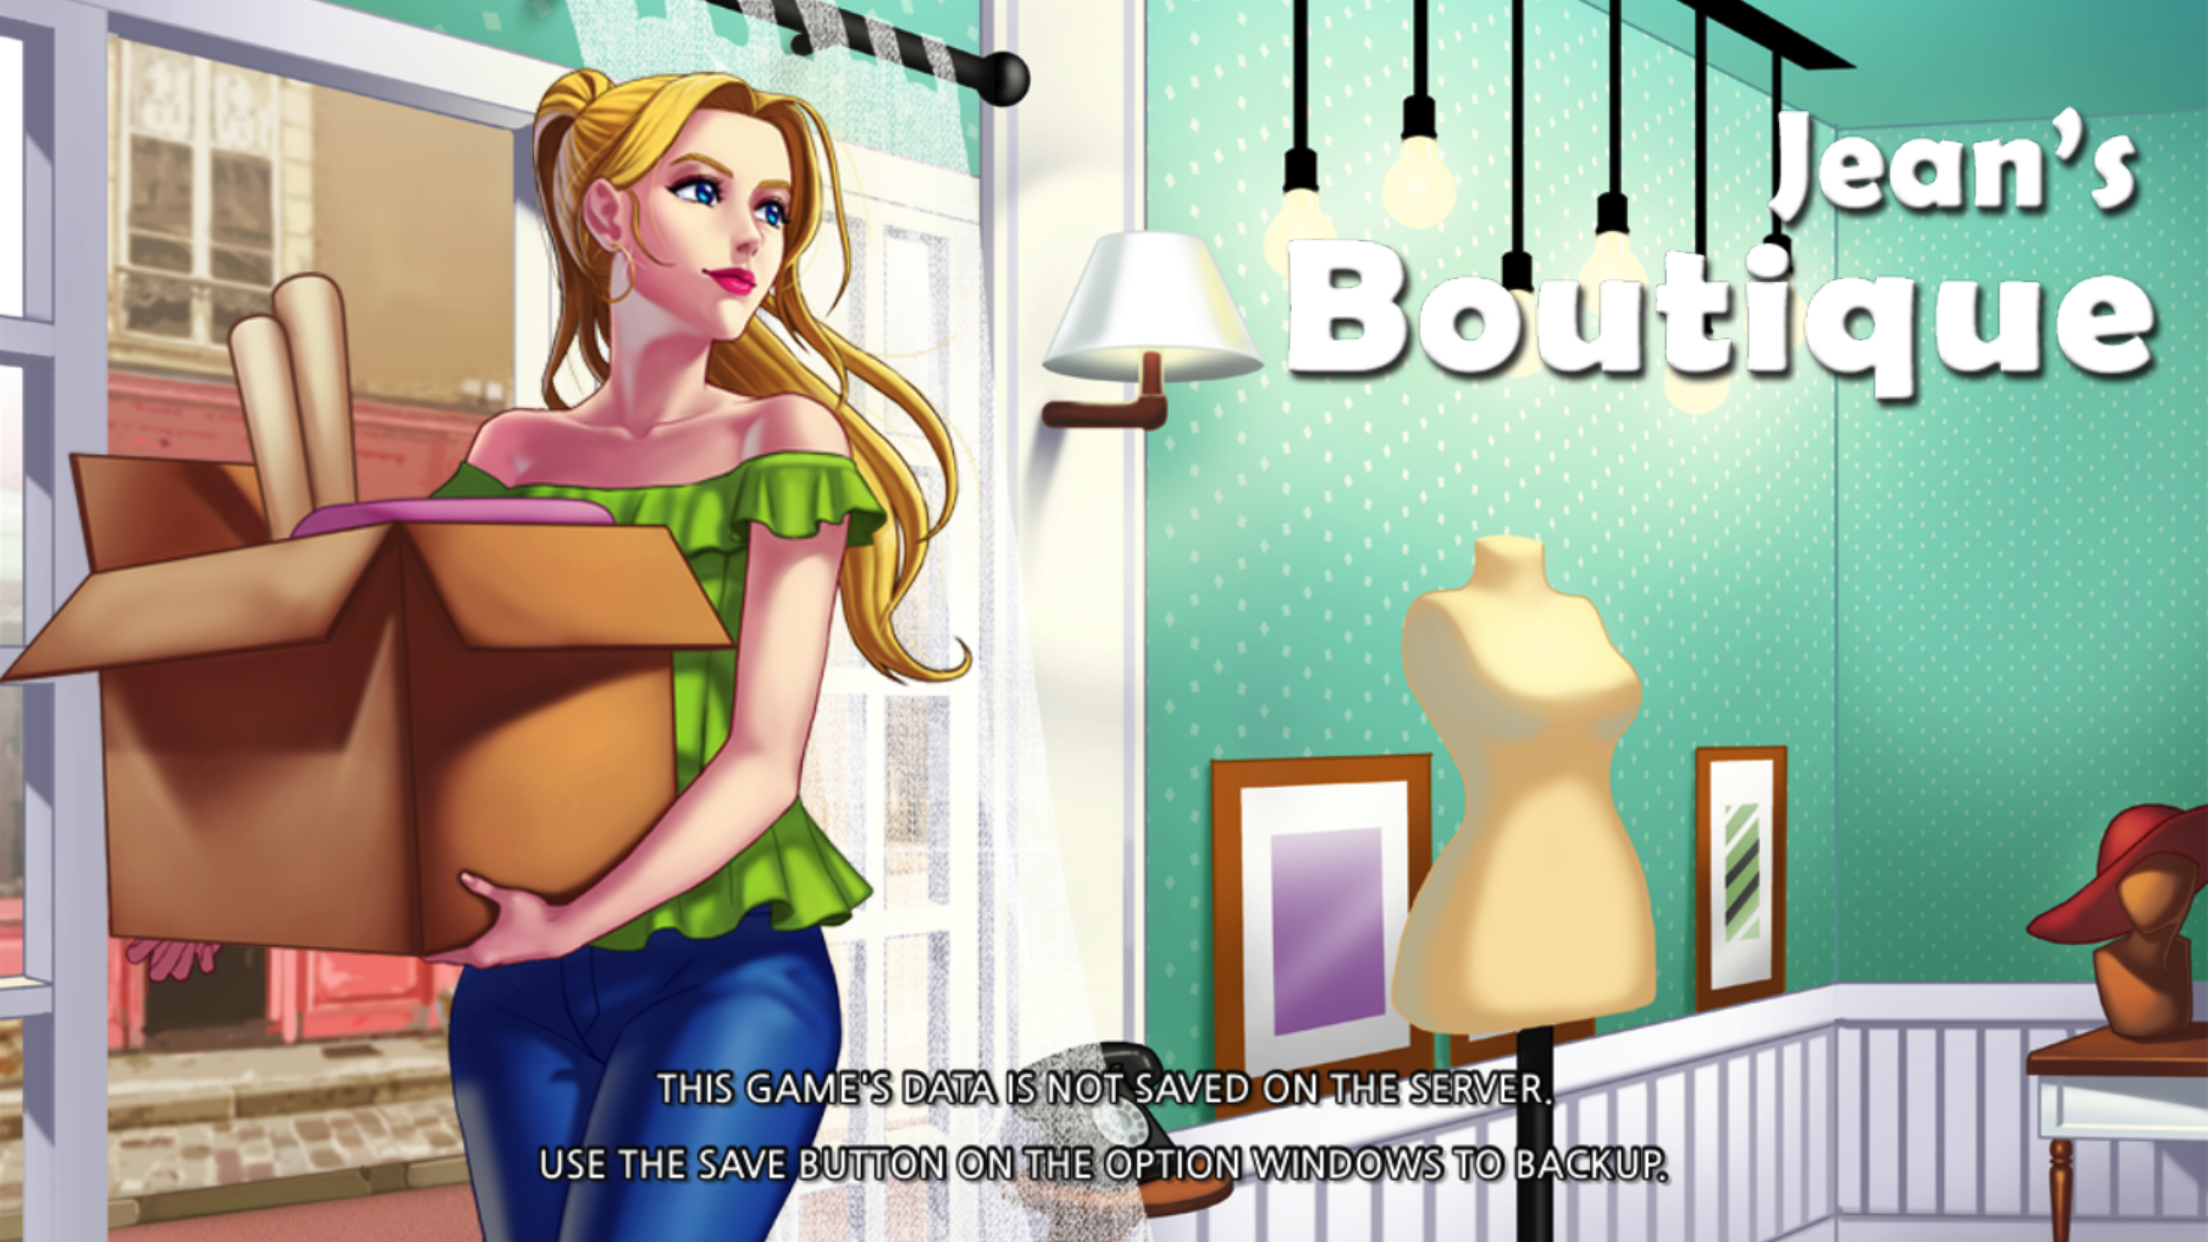 Banner of Boutique Jeans 3 1.0.41